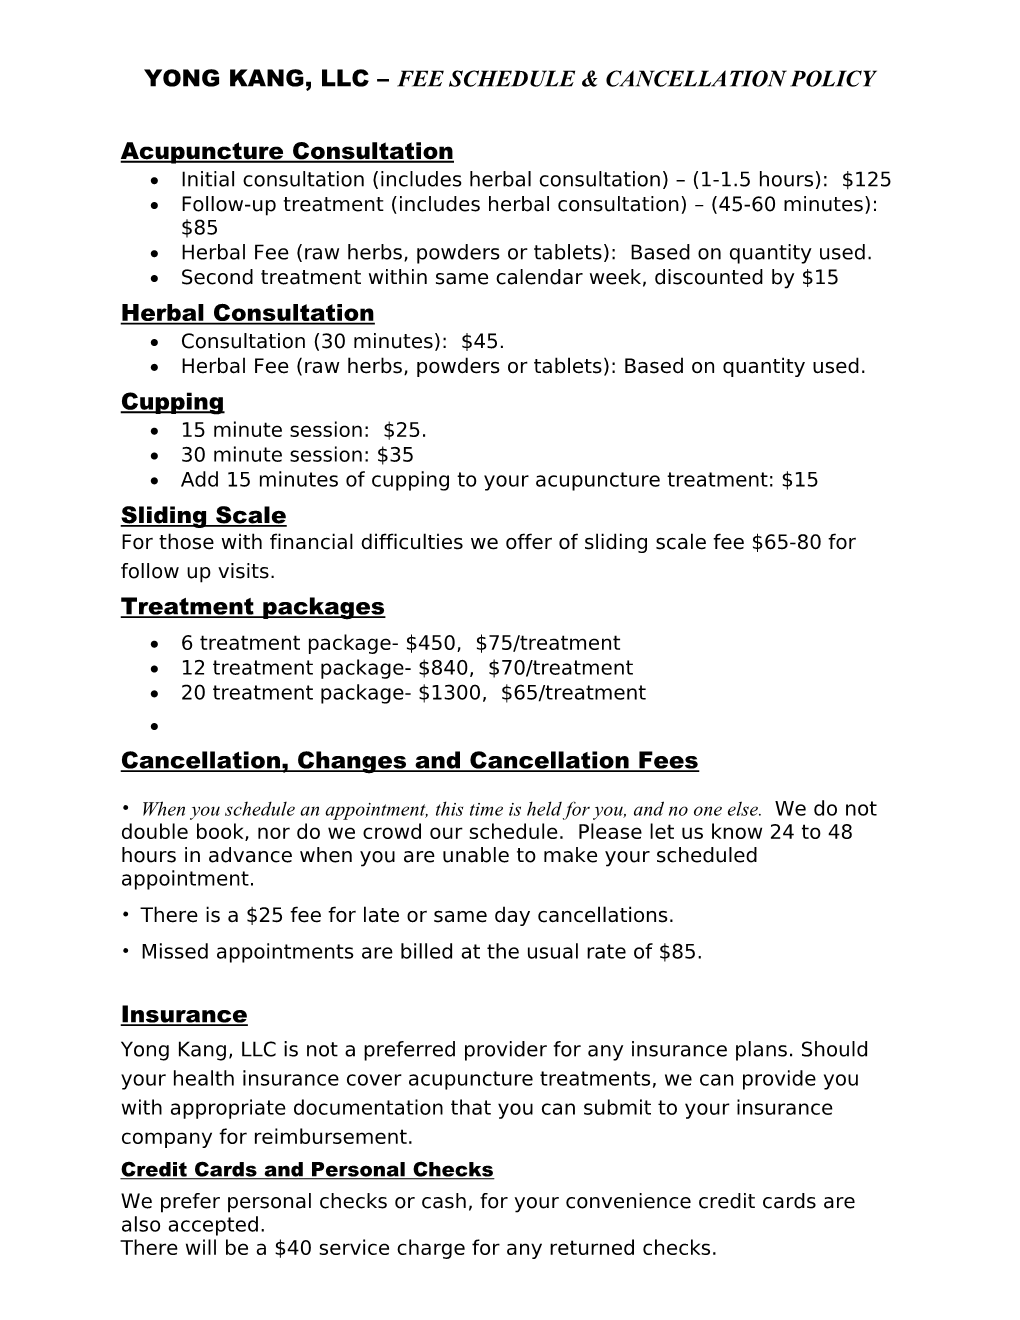 Yong Kang, Llc Fee Schedule & Cancellation Policy